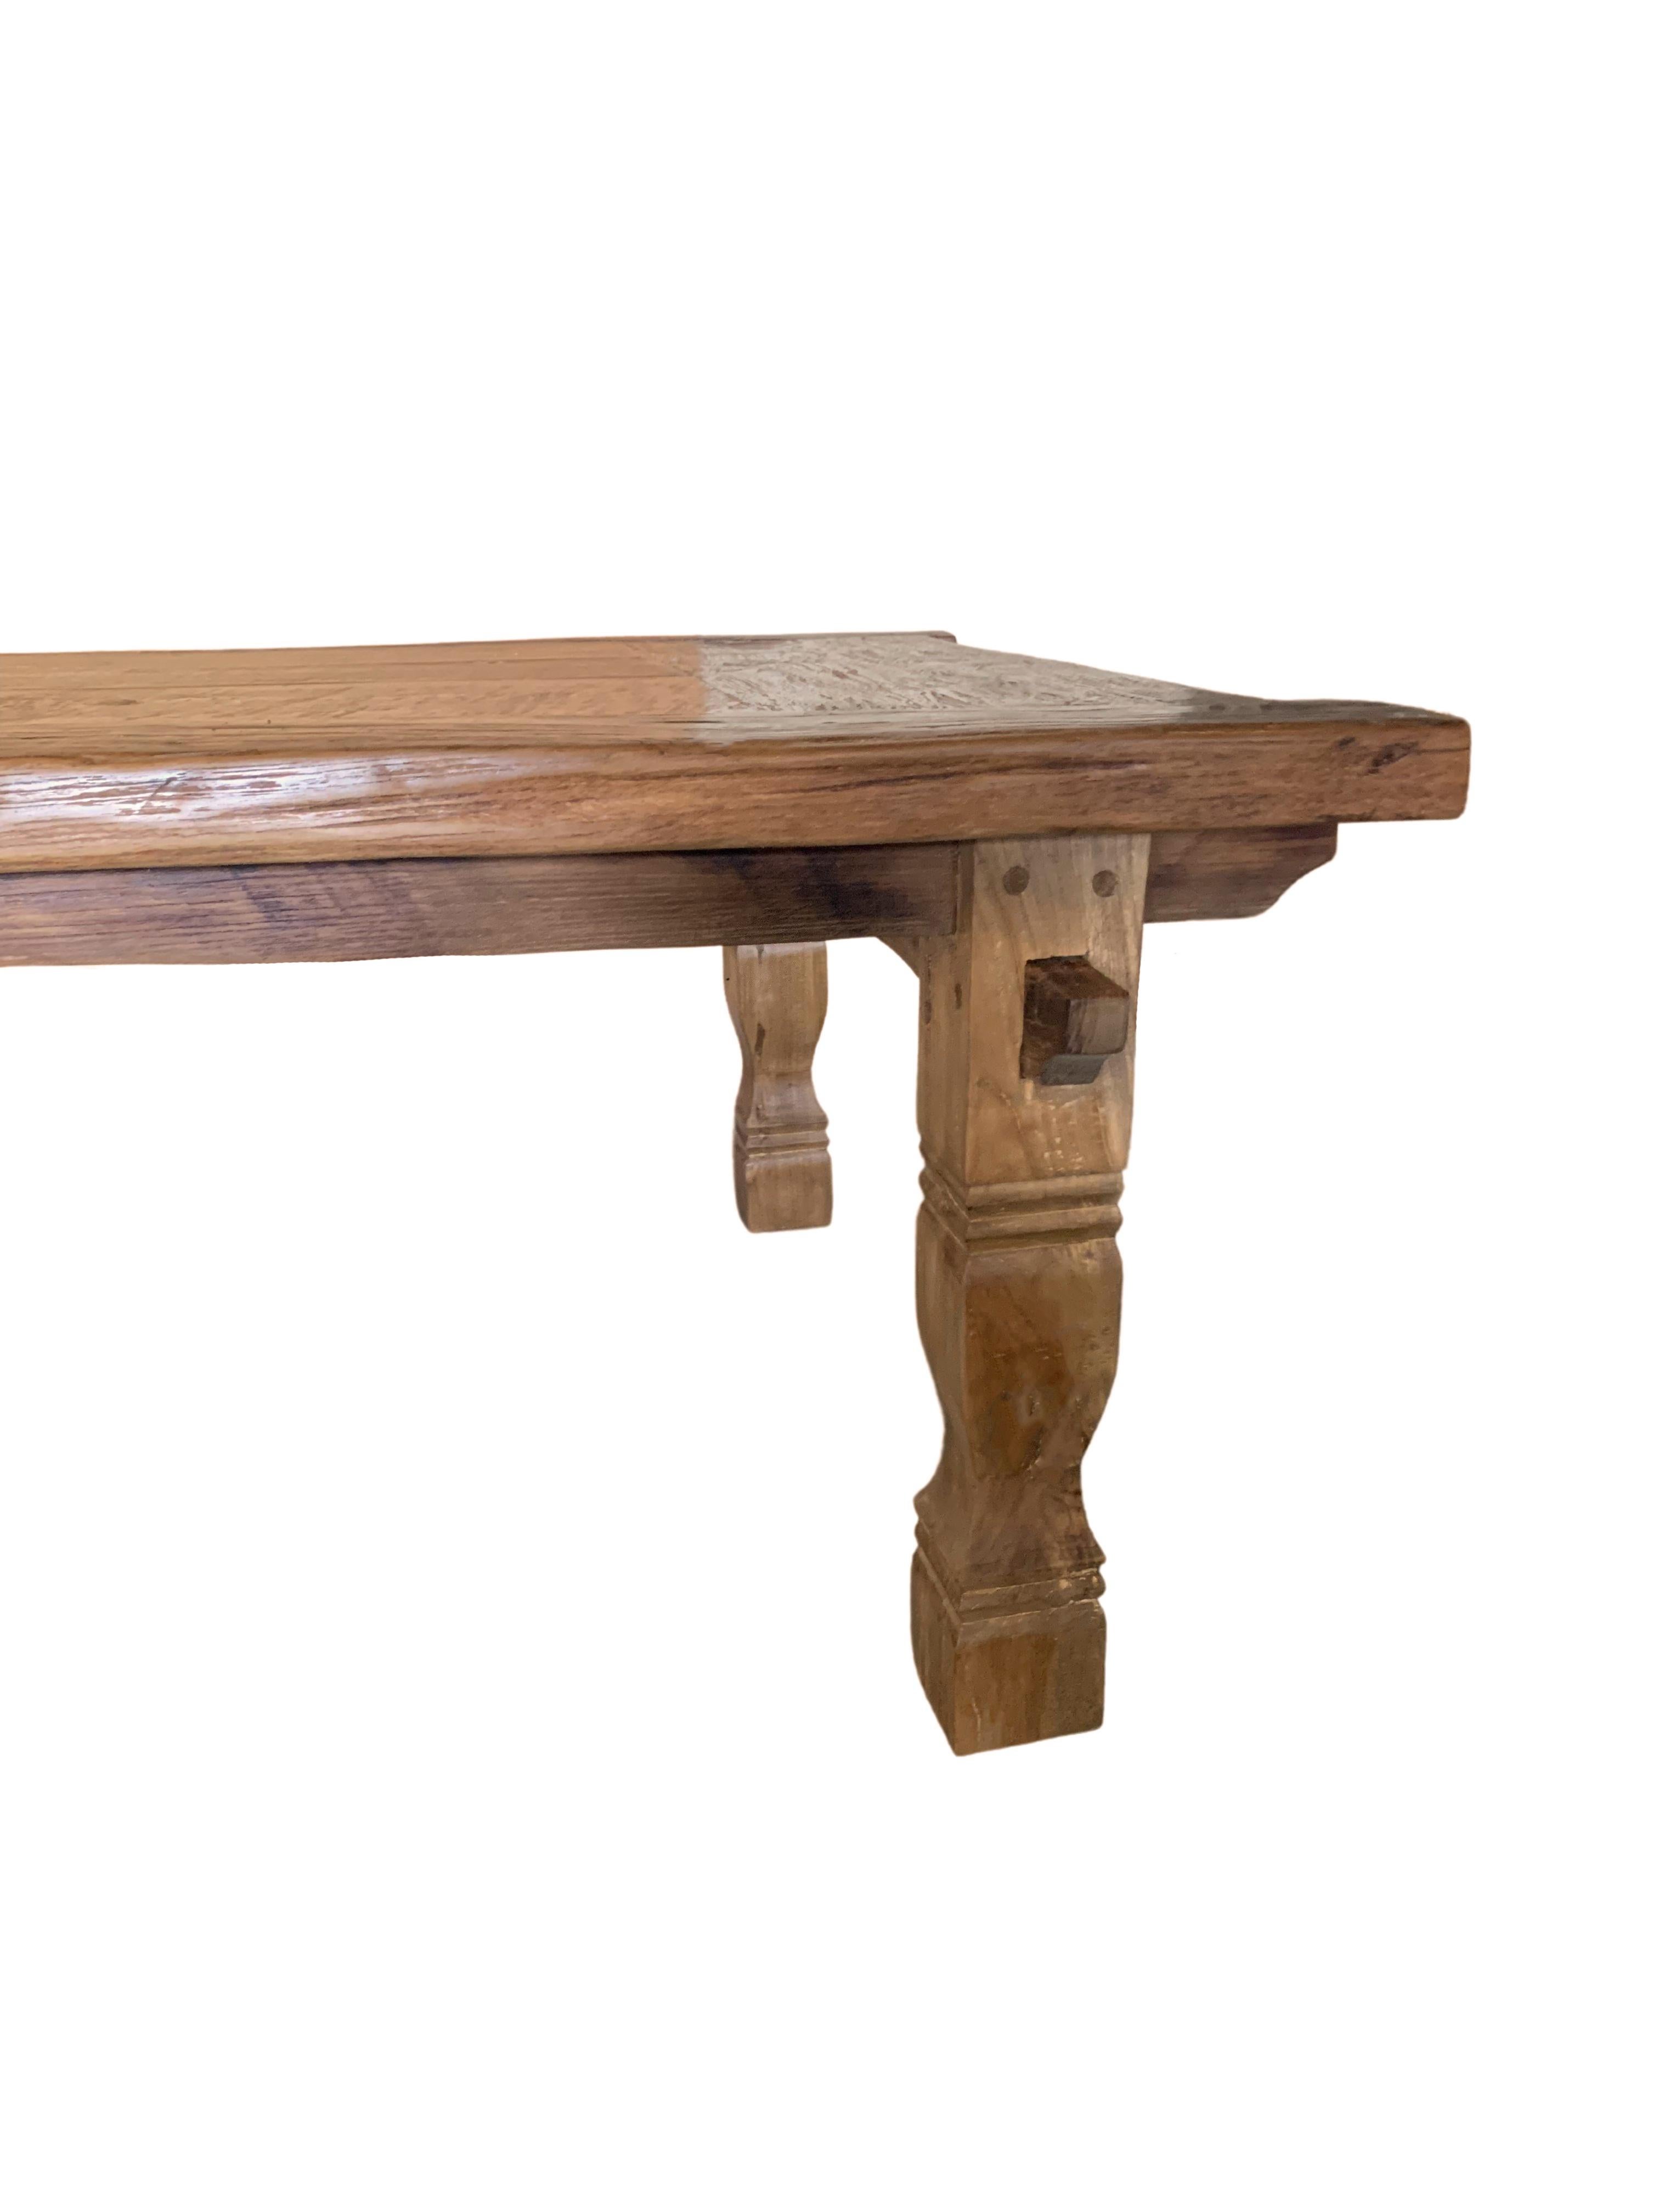 Other Vintage Teak Wood Weavers Table with Hand-Carved Detail, Java, Indonesia